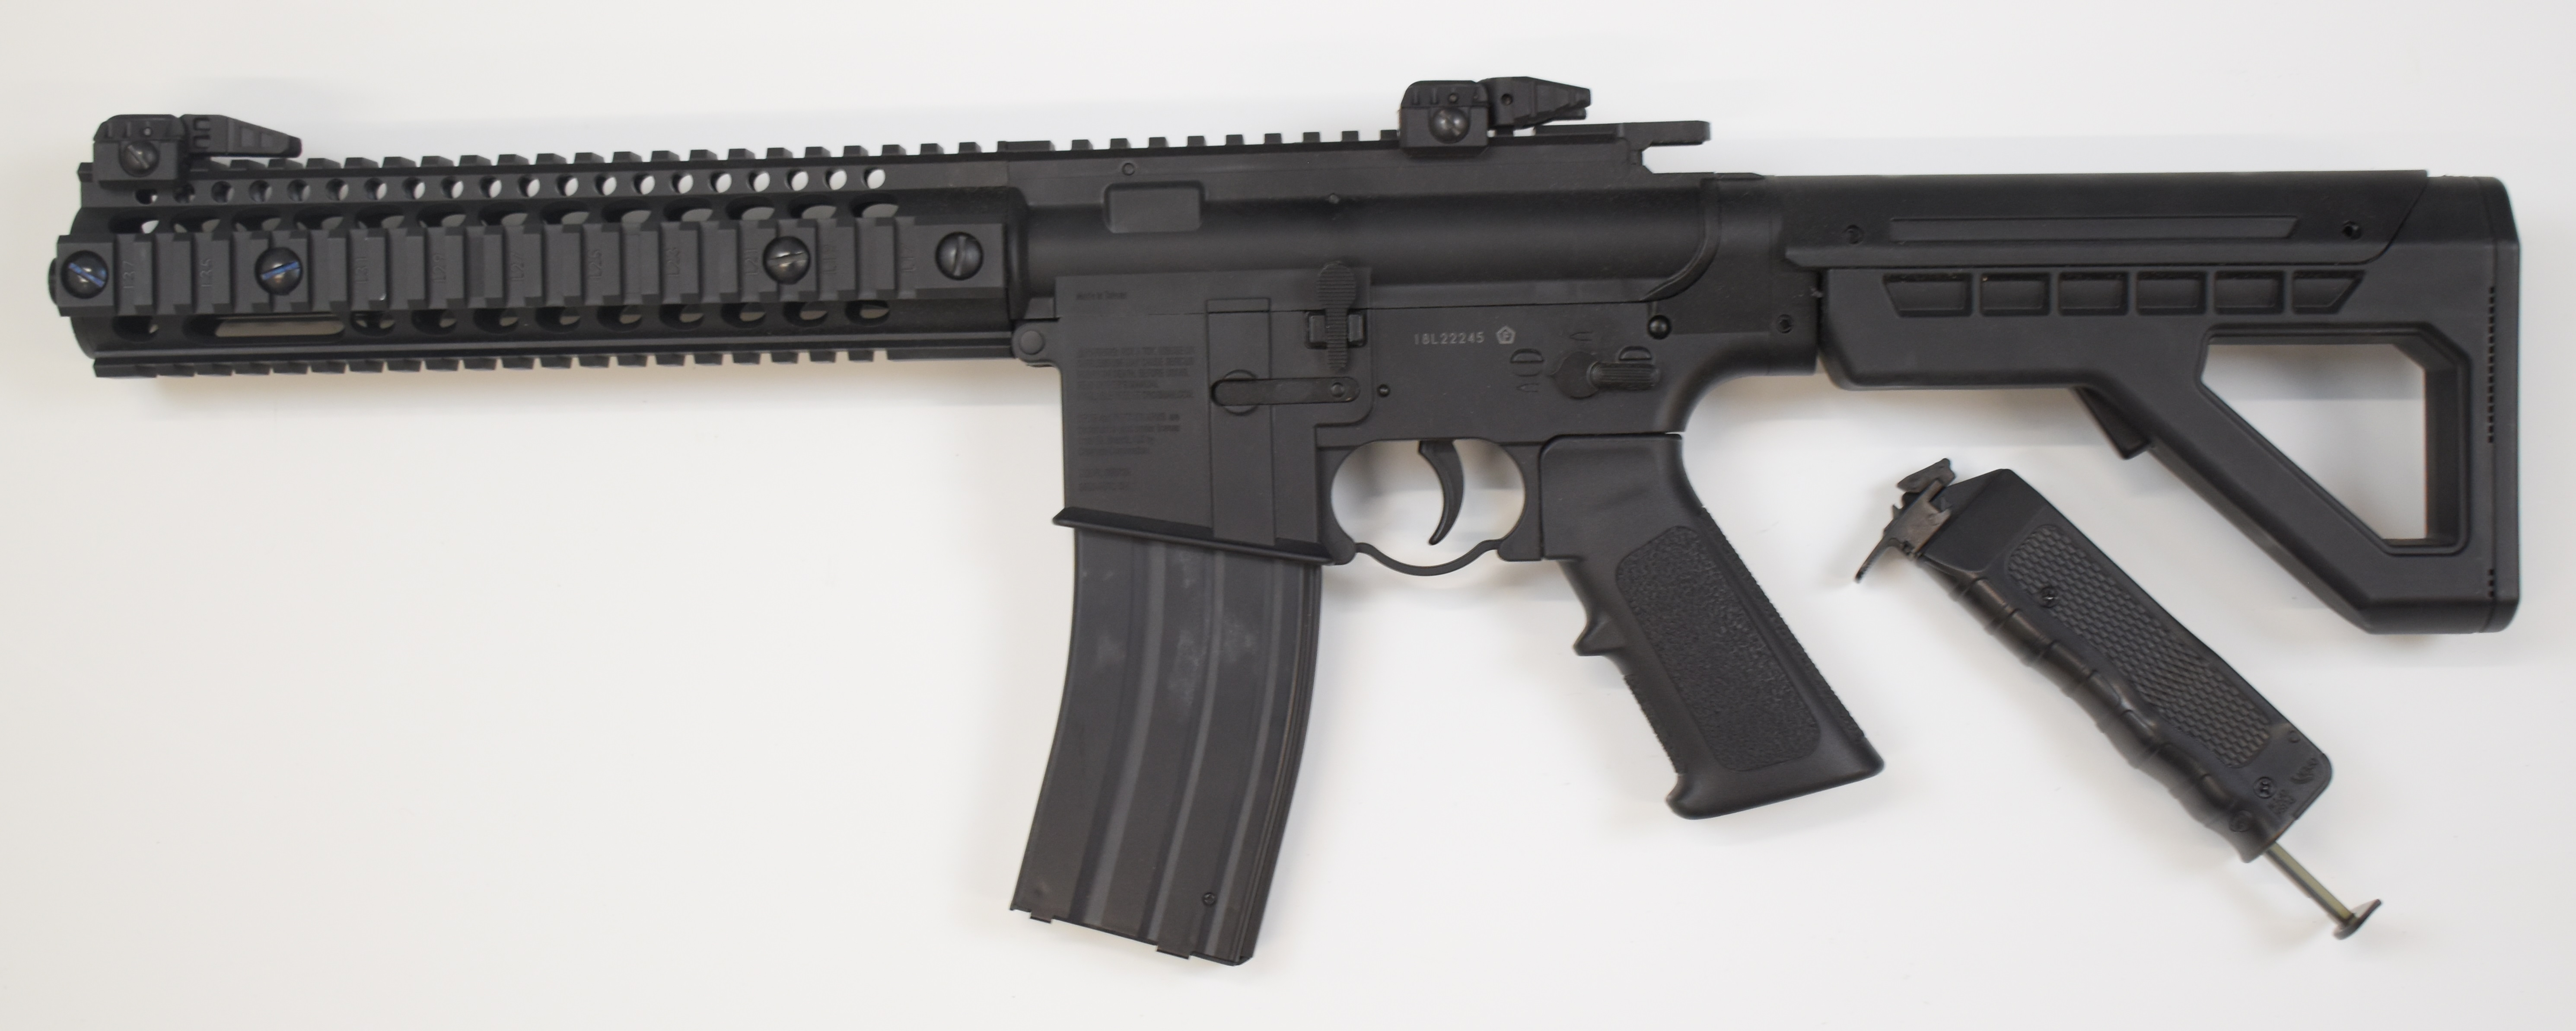 Crosman SBR .177 CO2 assault style air rifle with textured pistol grip, tactical stock, multi-shot - Image 6 of 9